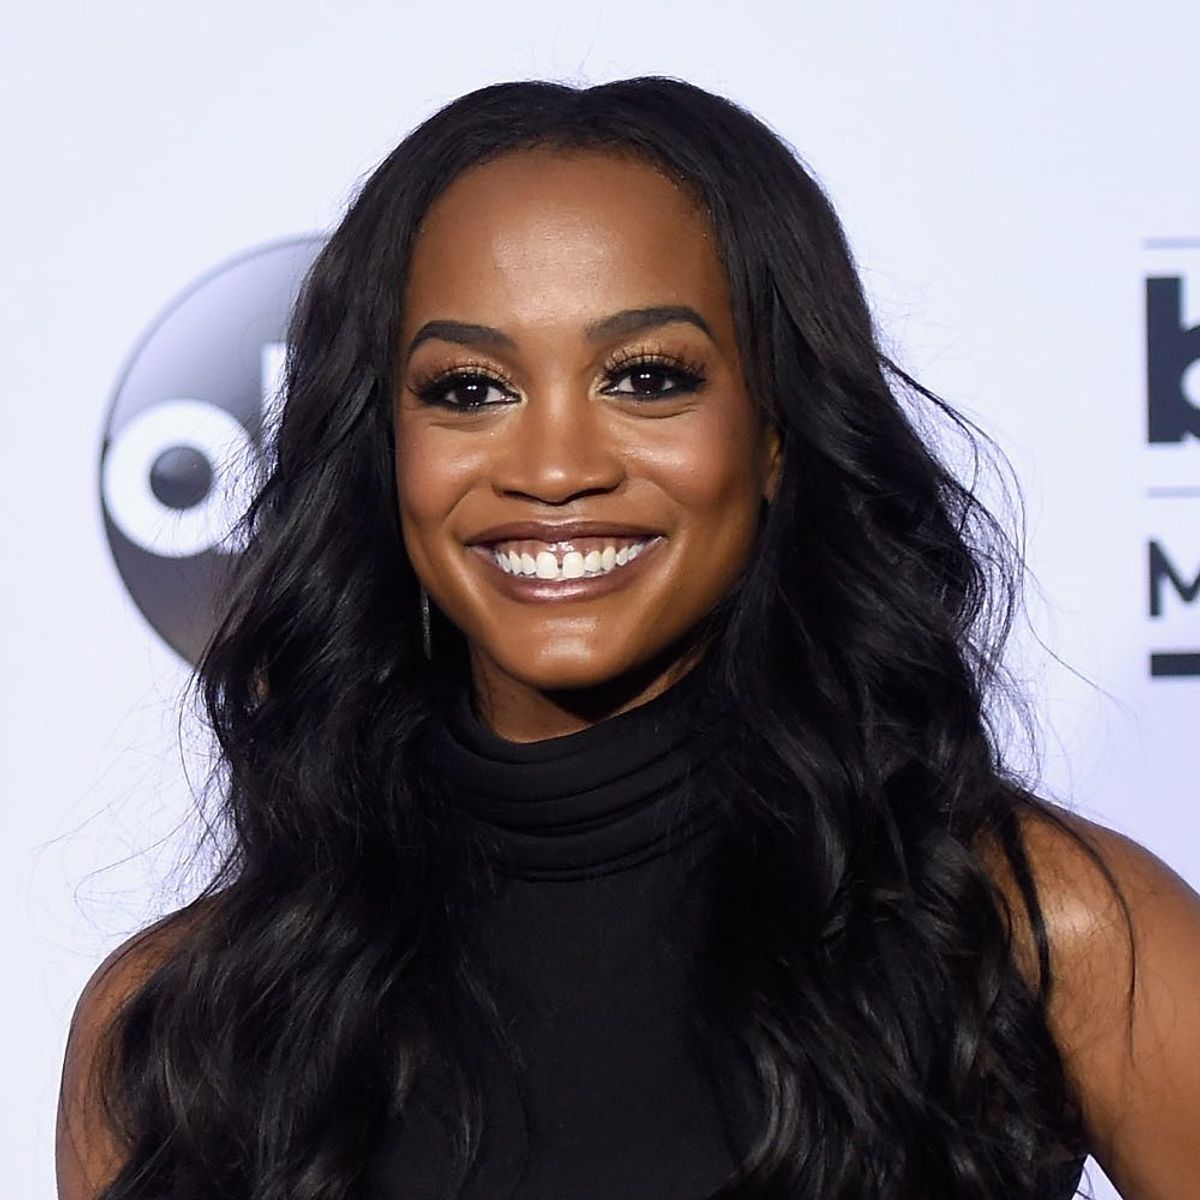 The Bachelorette’s Rachel Lindsay Once Dated *This* Famous NBA Player